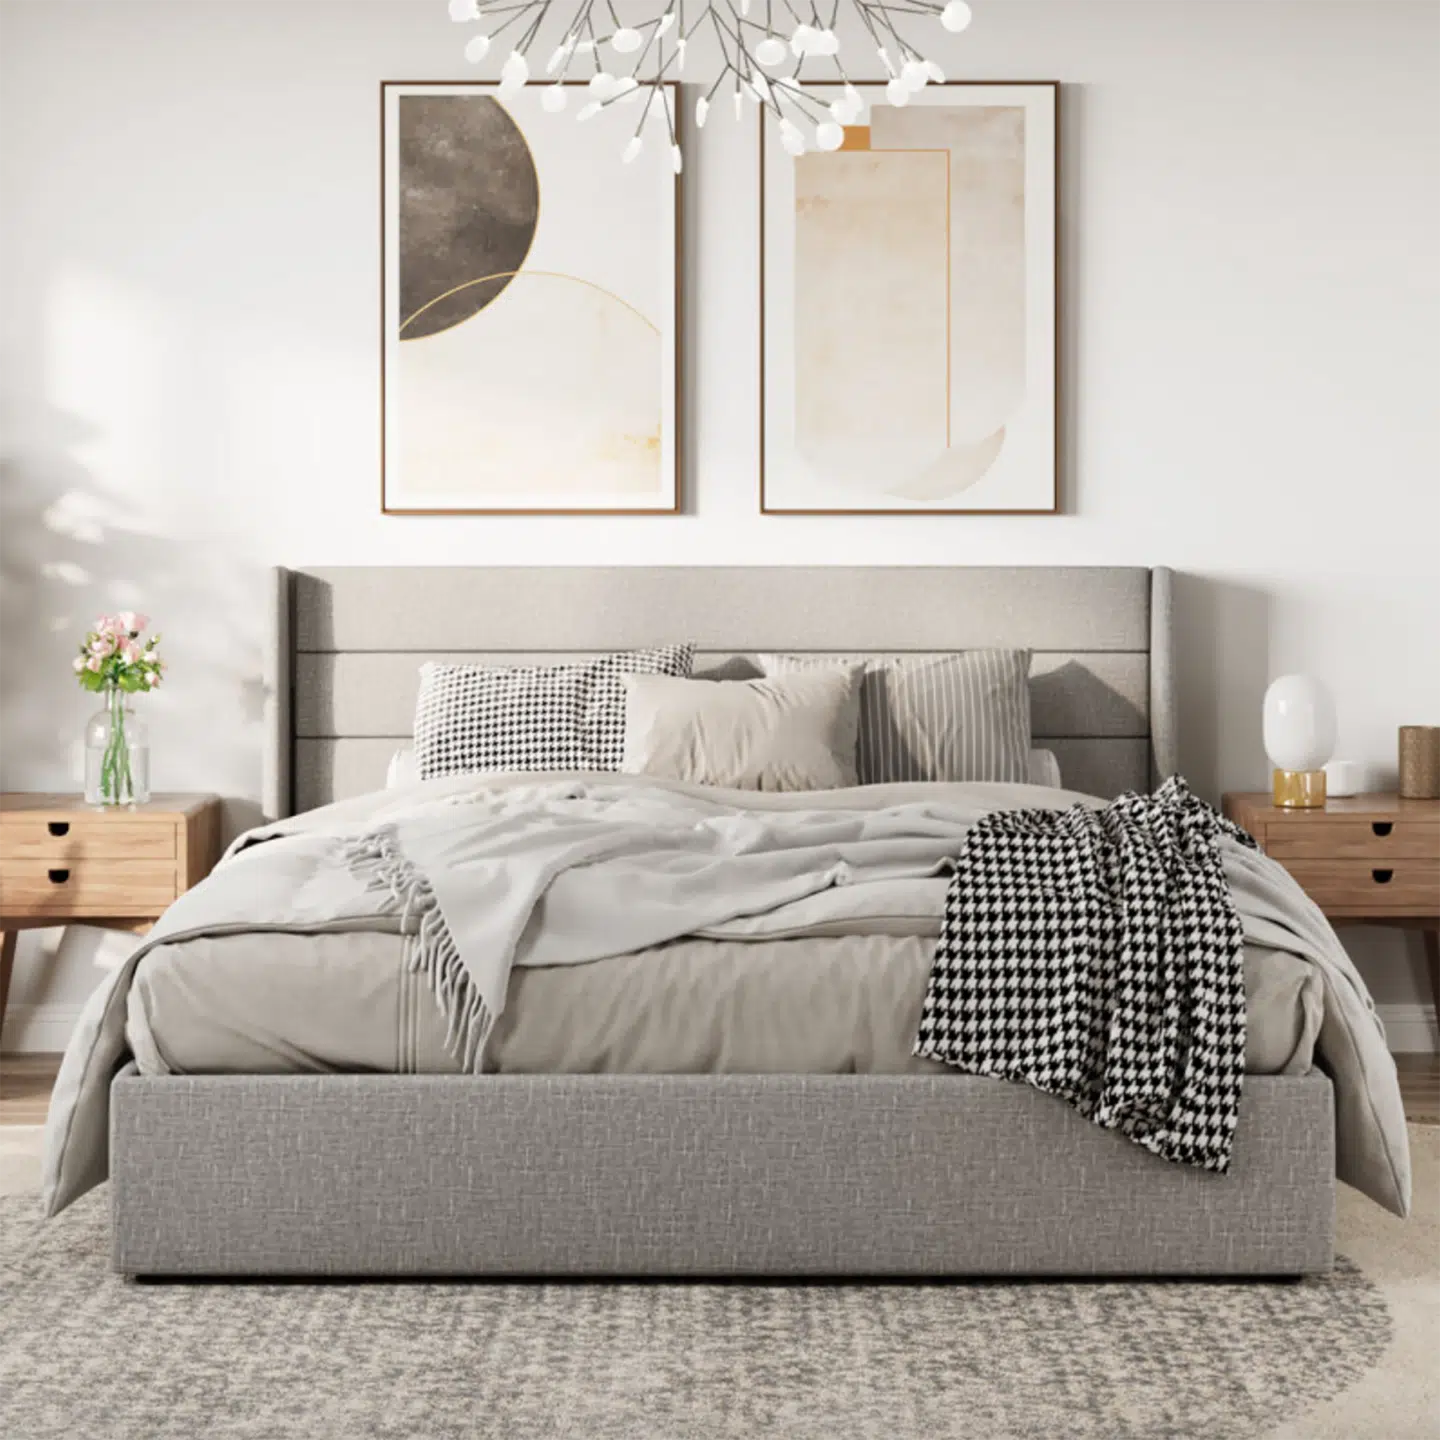 Top Cloud bed frame dupe picks, by home blogger What The Fab